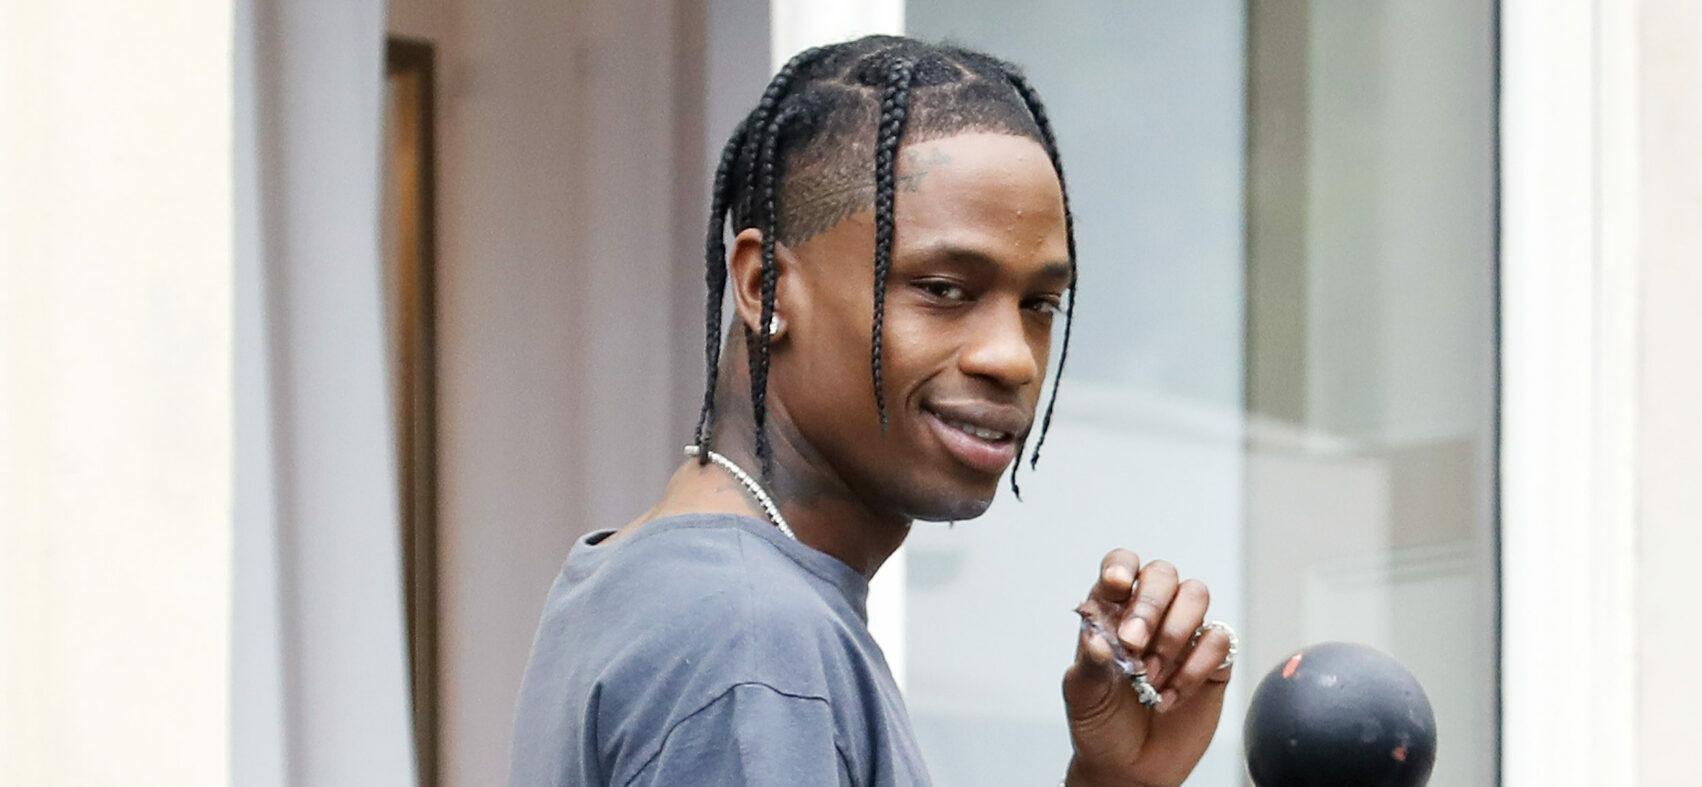 Travis Scott Accused Of Going ‘Sicko Mode’ On A Sound Engineer, New Lawsuit Claims